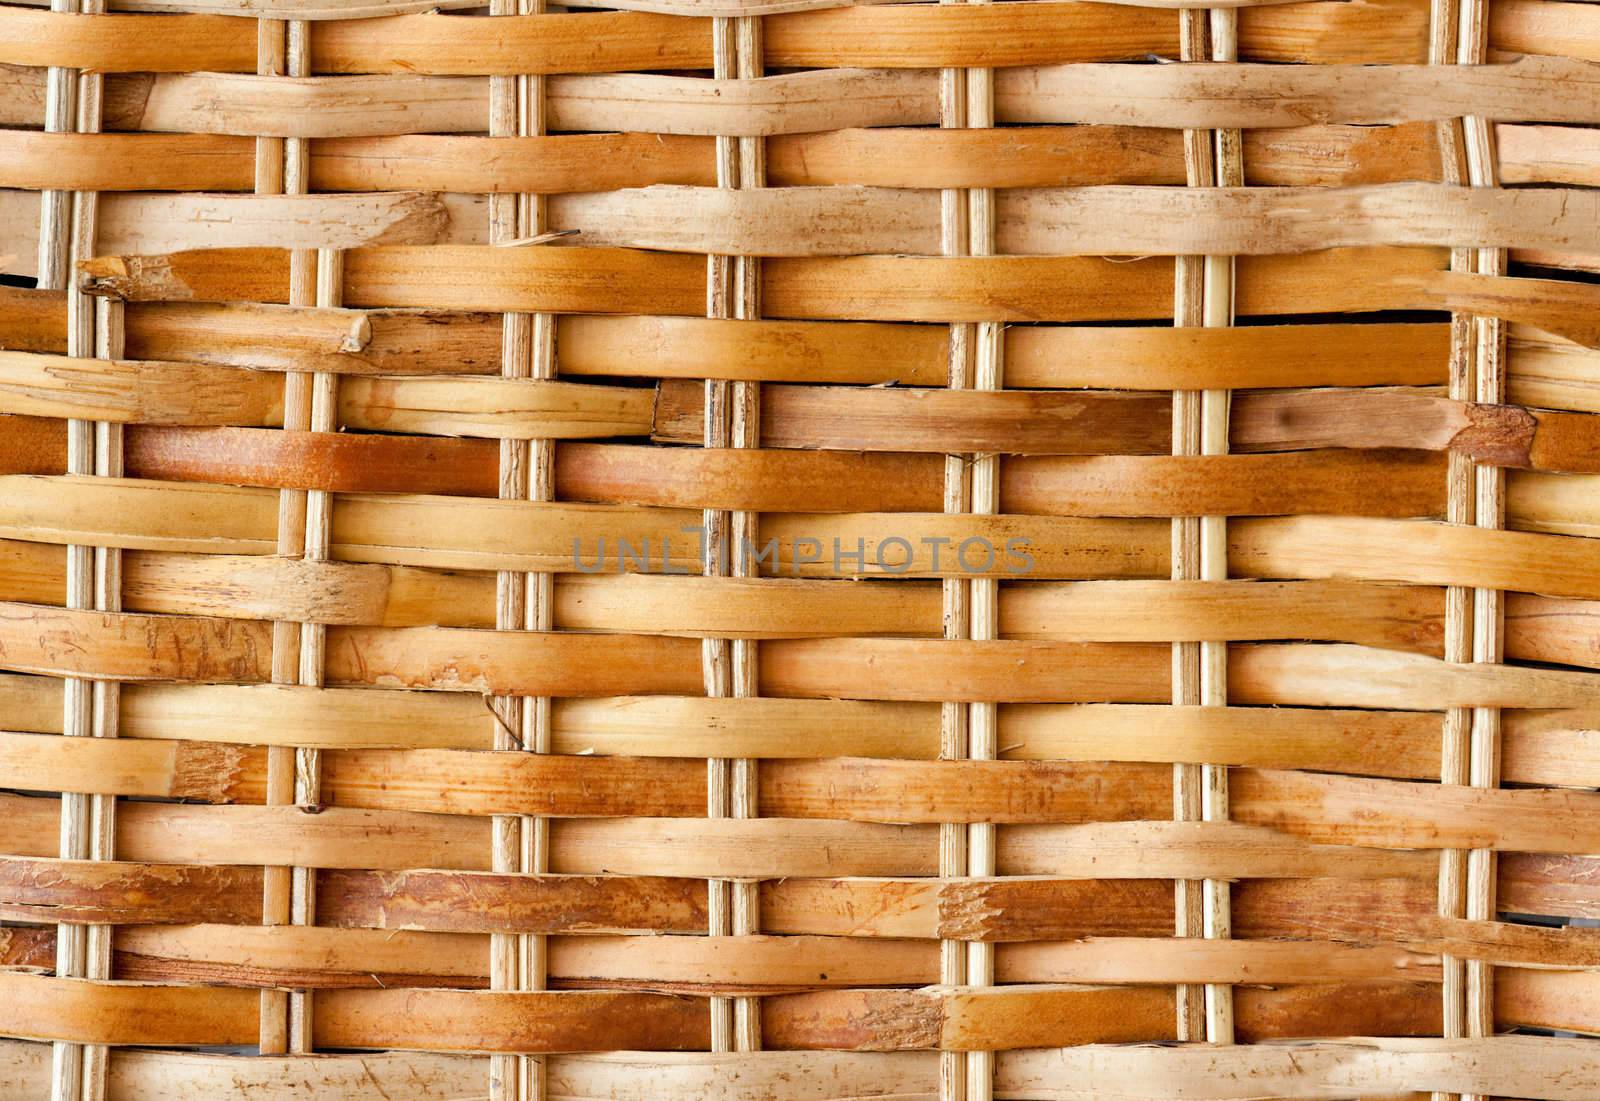 A light colored seamless wicker backet background.  This background will repeat forever if tiled.